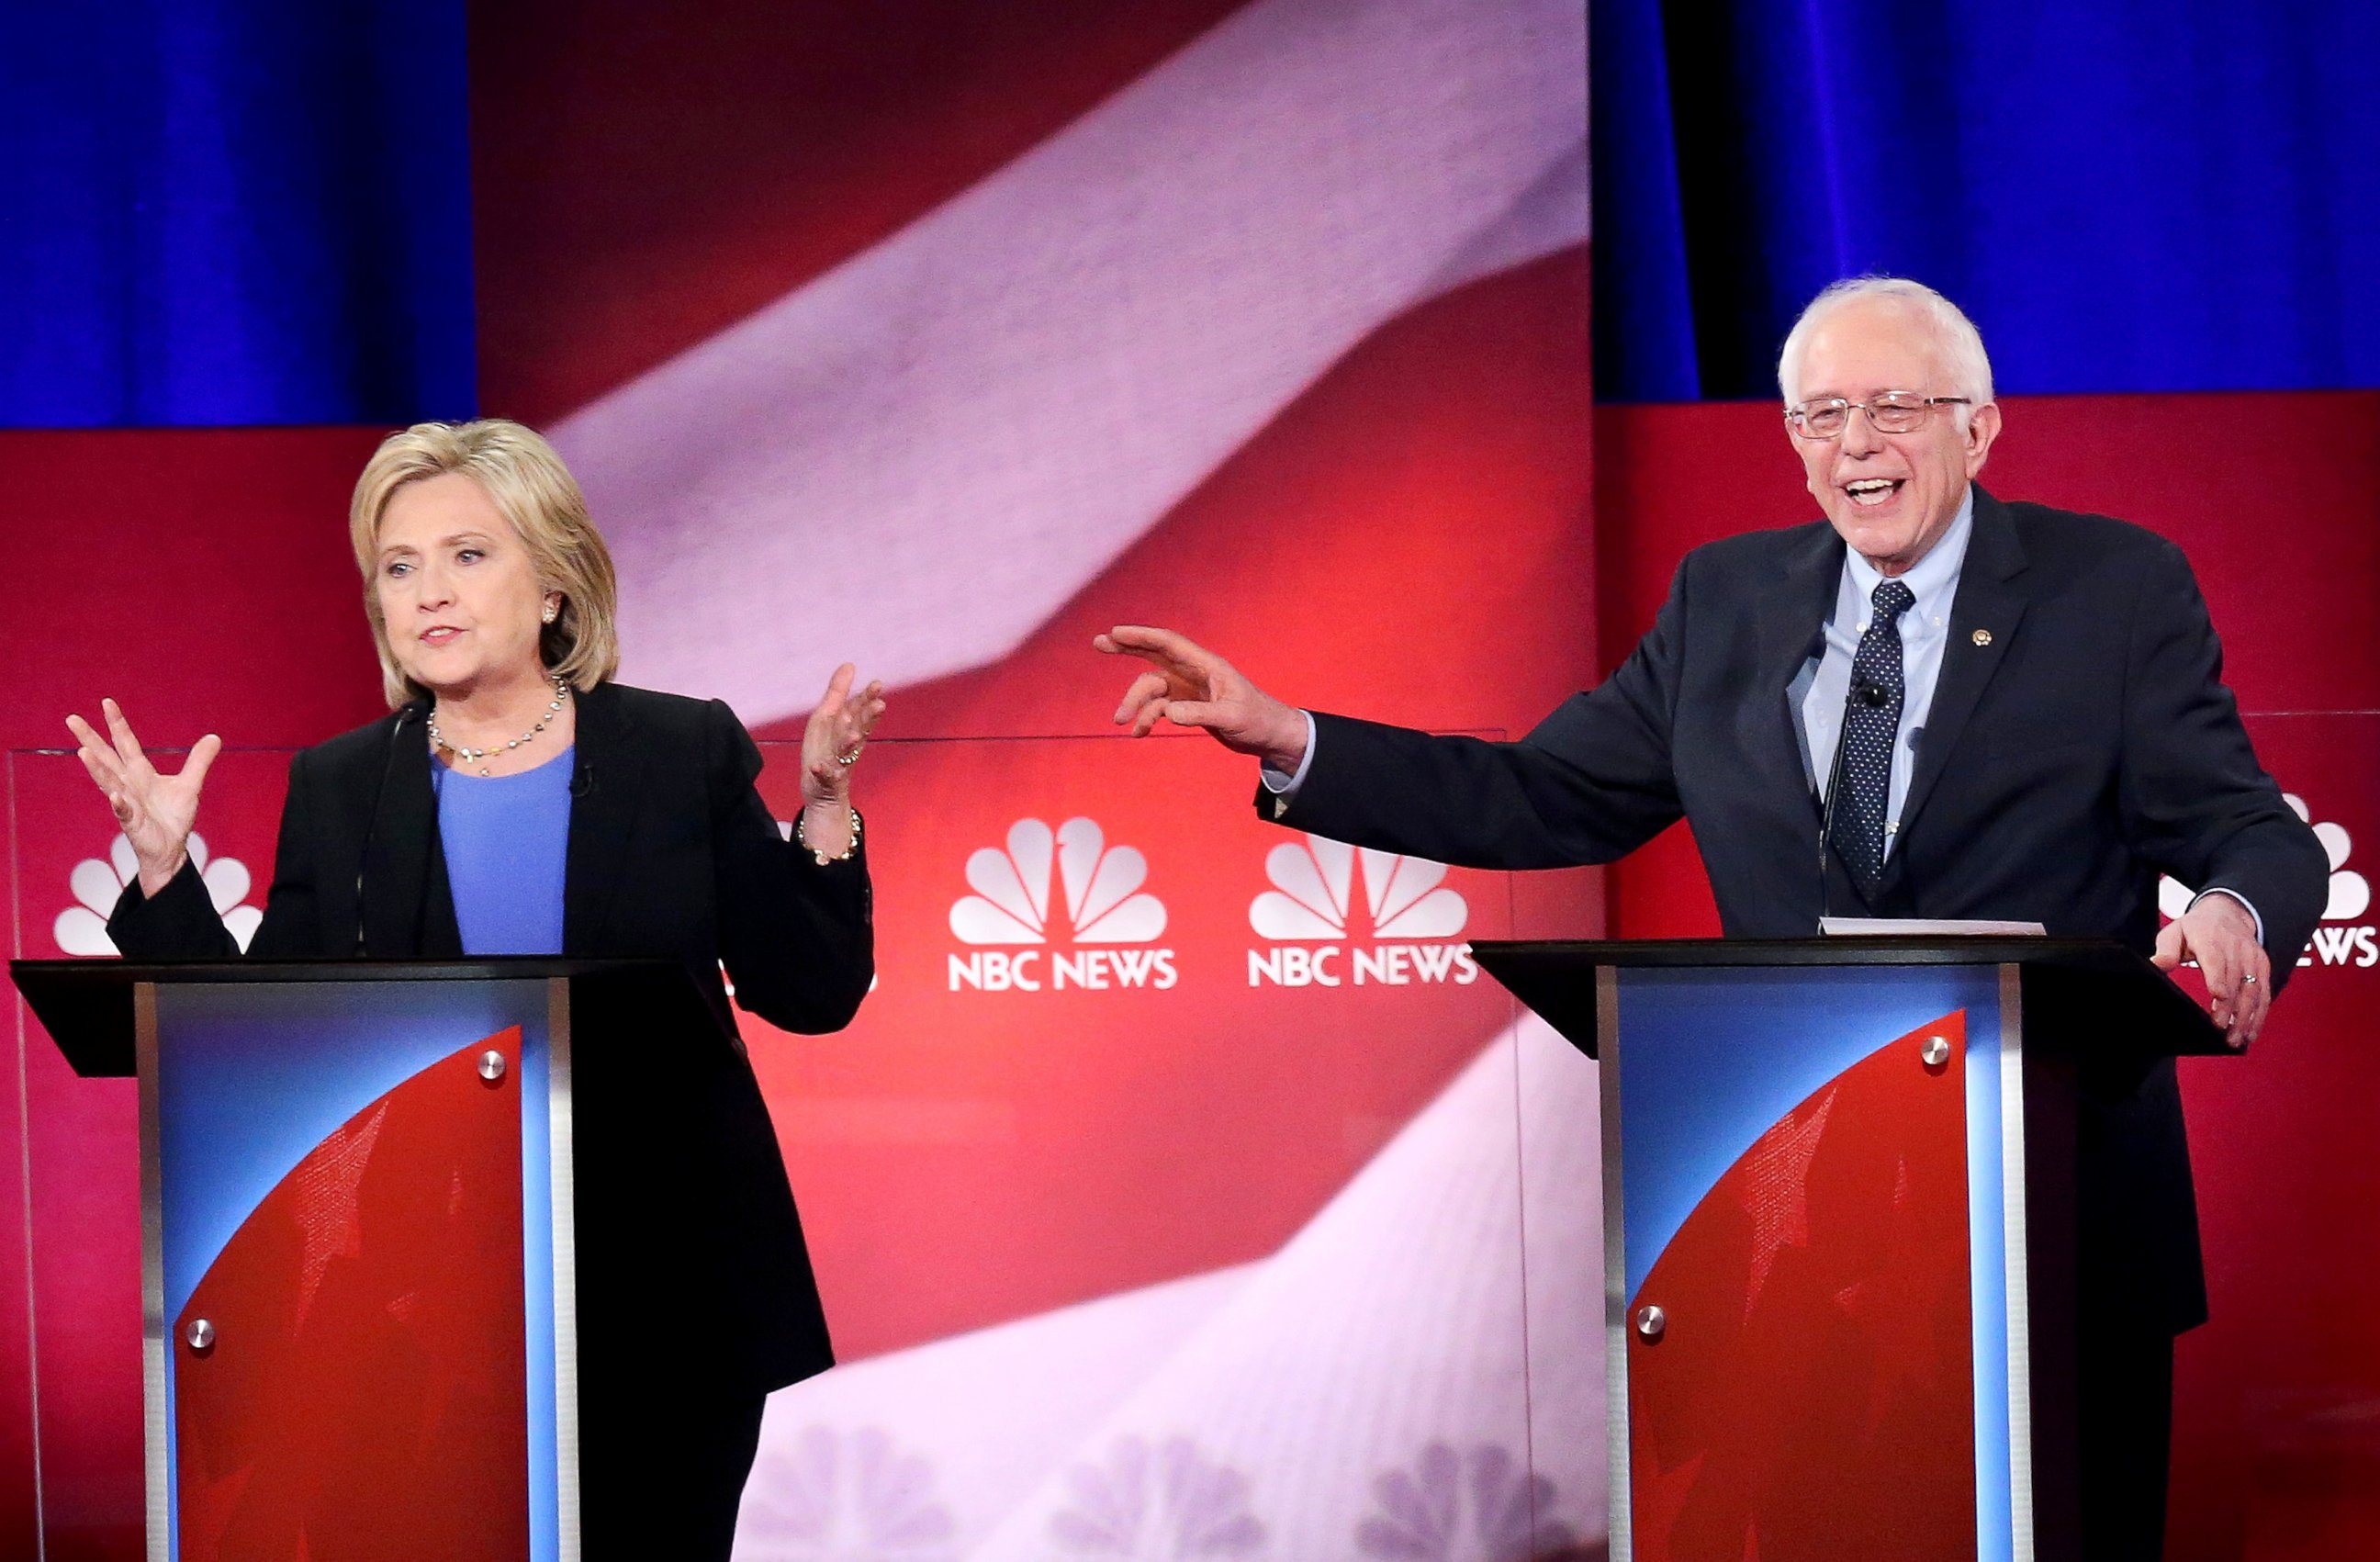 PHOTO: Hillary Clinton and Senator Bernie Sanders participate in the Democratic Candidate Debate hosted by NBC News and YouTube, Jan. 17, 2016, in Charleston, South Carolina.